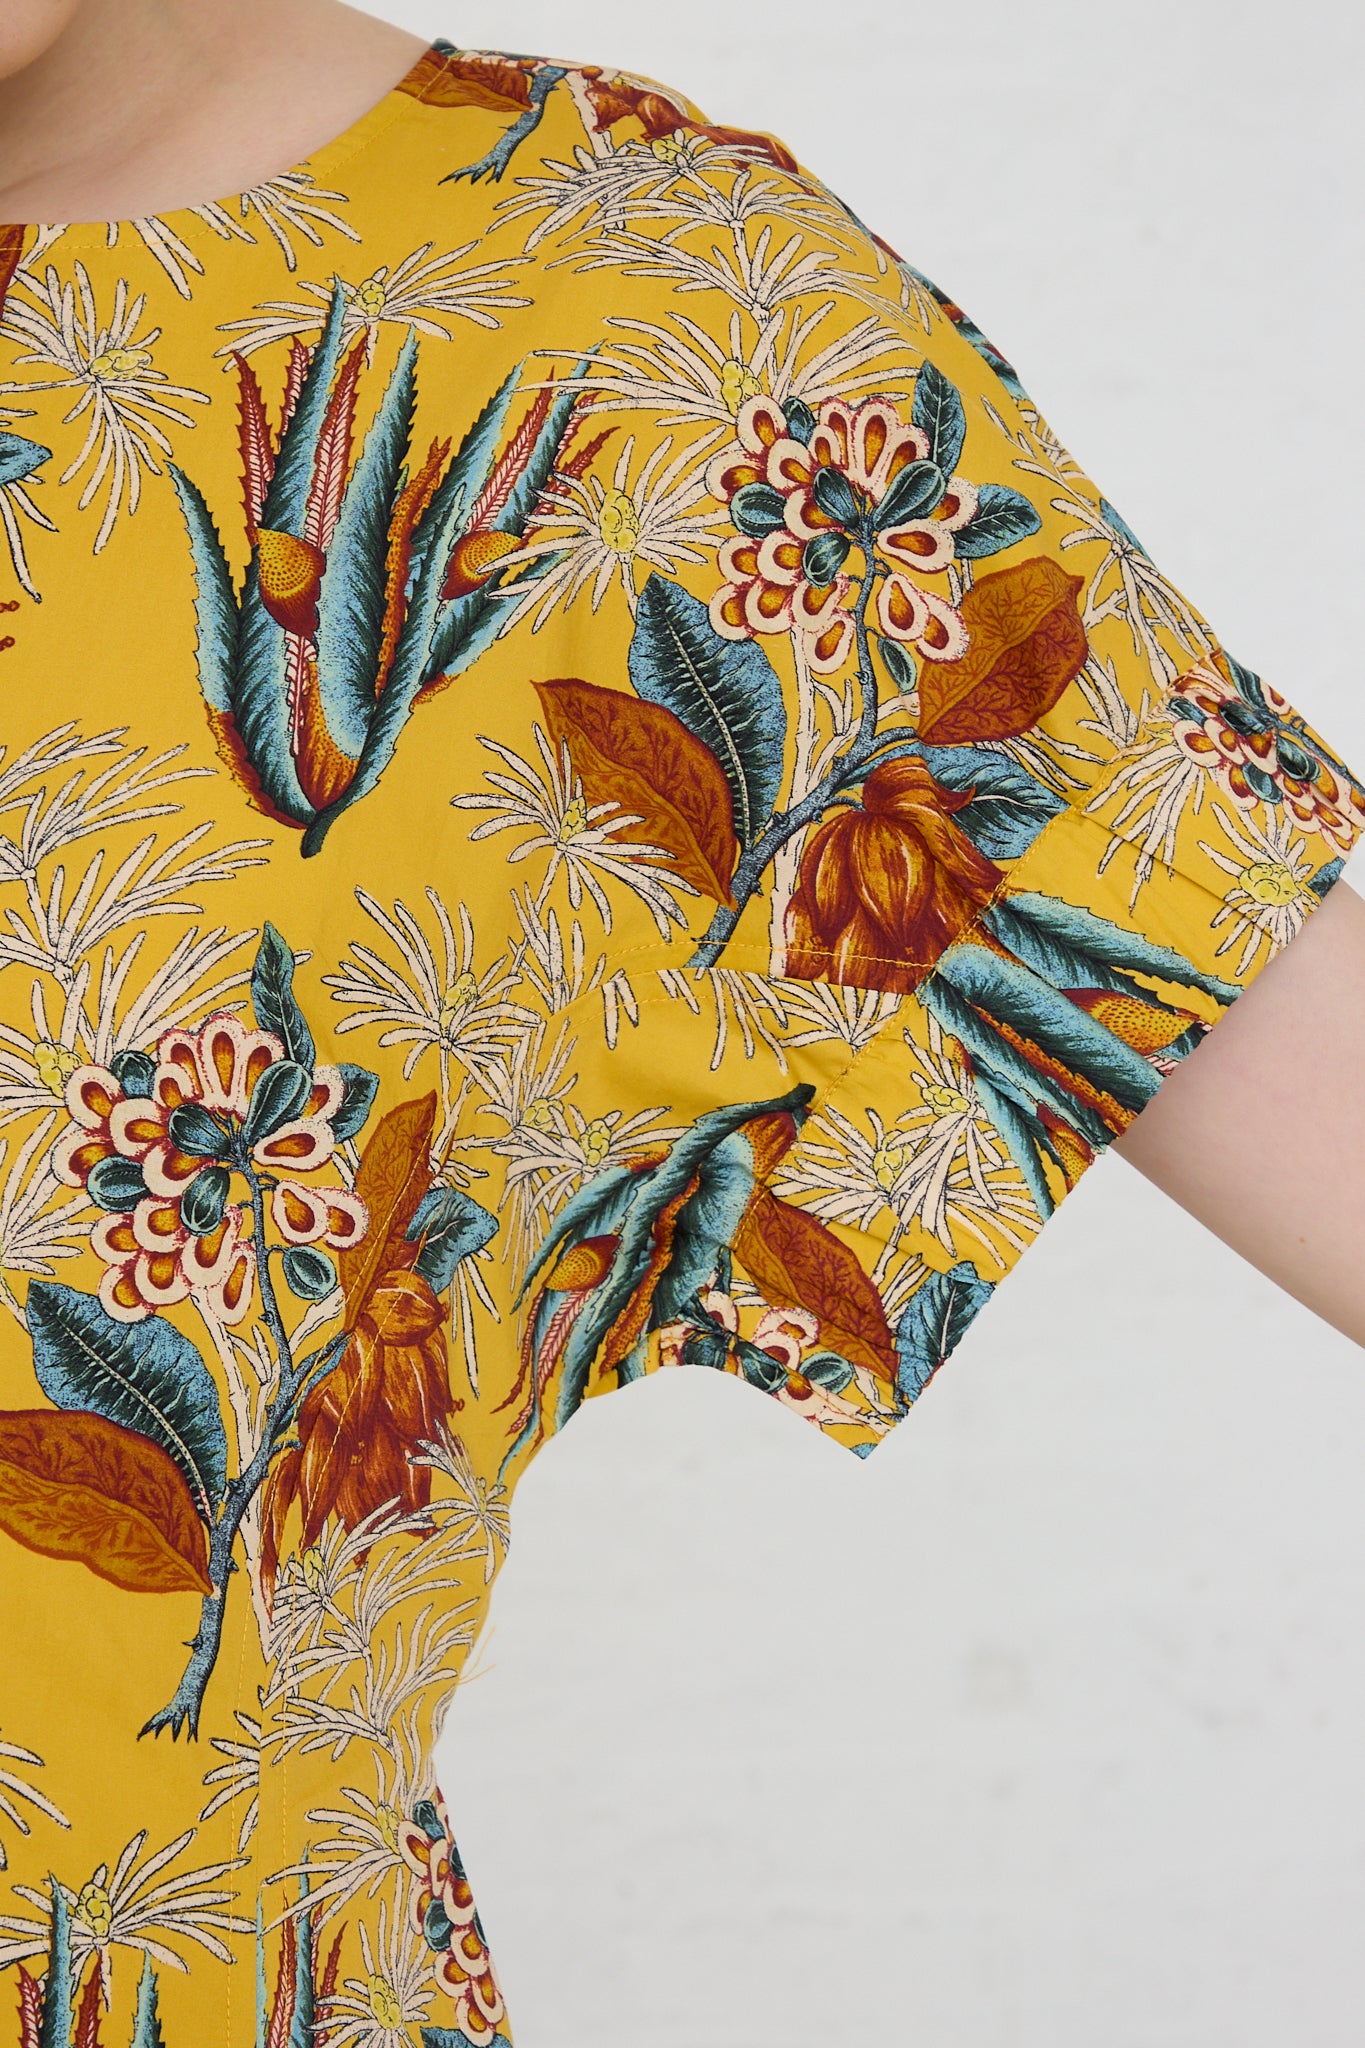 A woman wearing a Devon Dress in Marigold by Ulla Johnson with a tropical print. Up close view of sleeve.